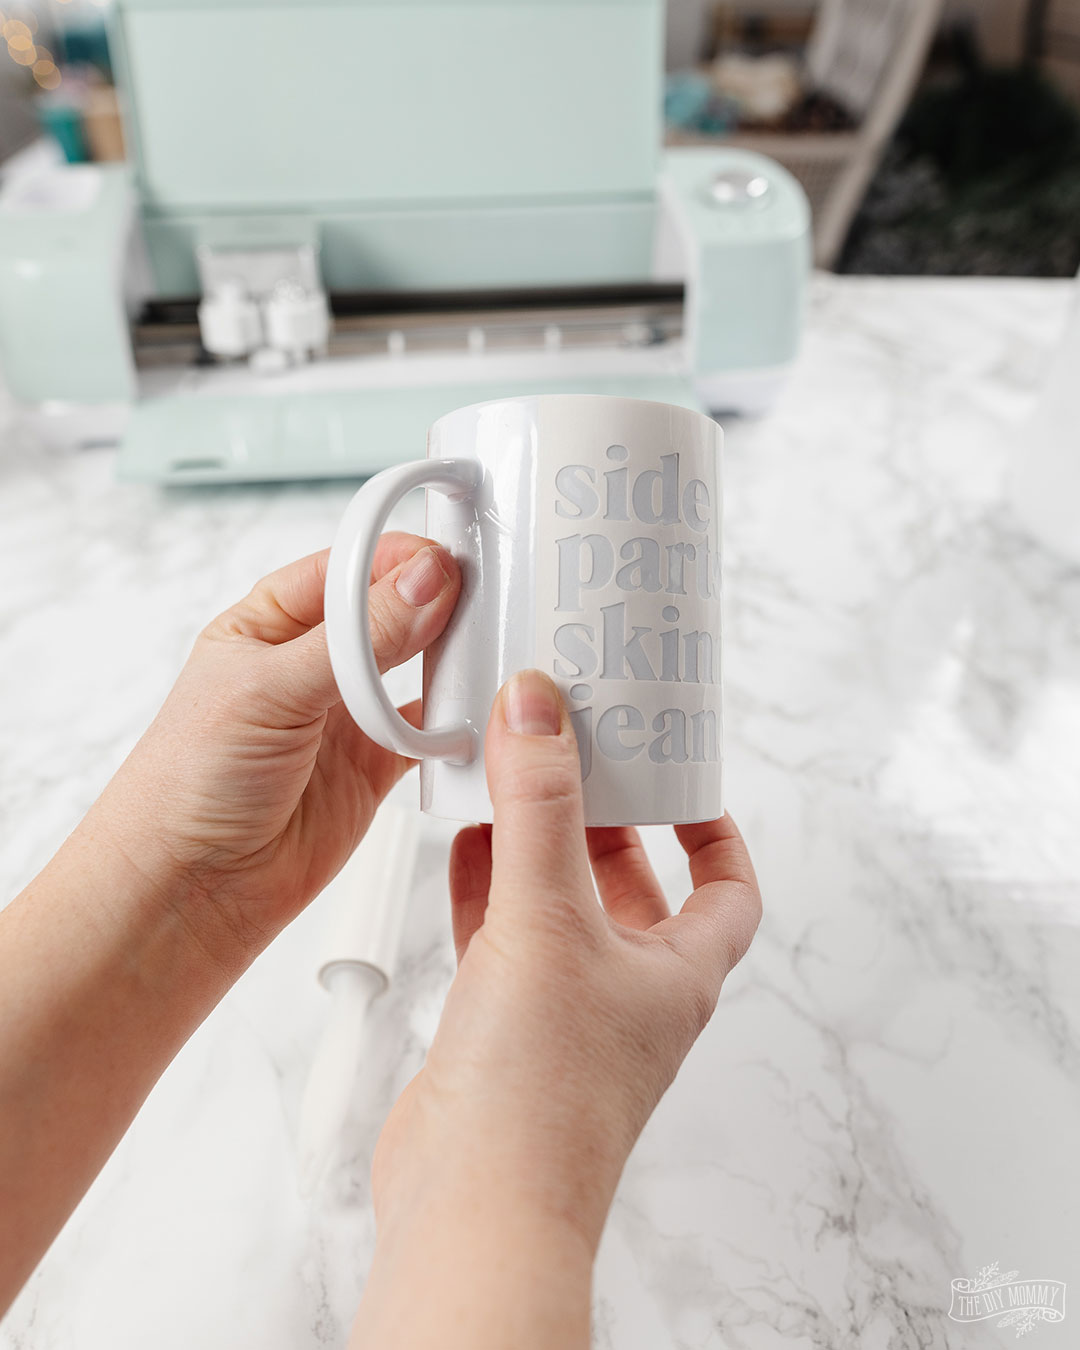 The Cricut Mug Press is here, and you can make professional looking, dishwasher safe mugs with with beautiful designs. Here's how!